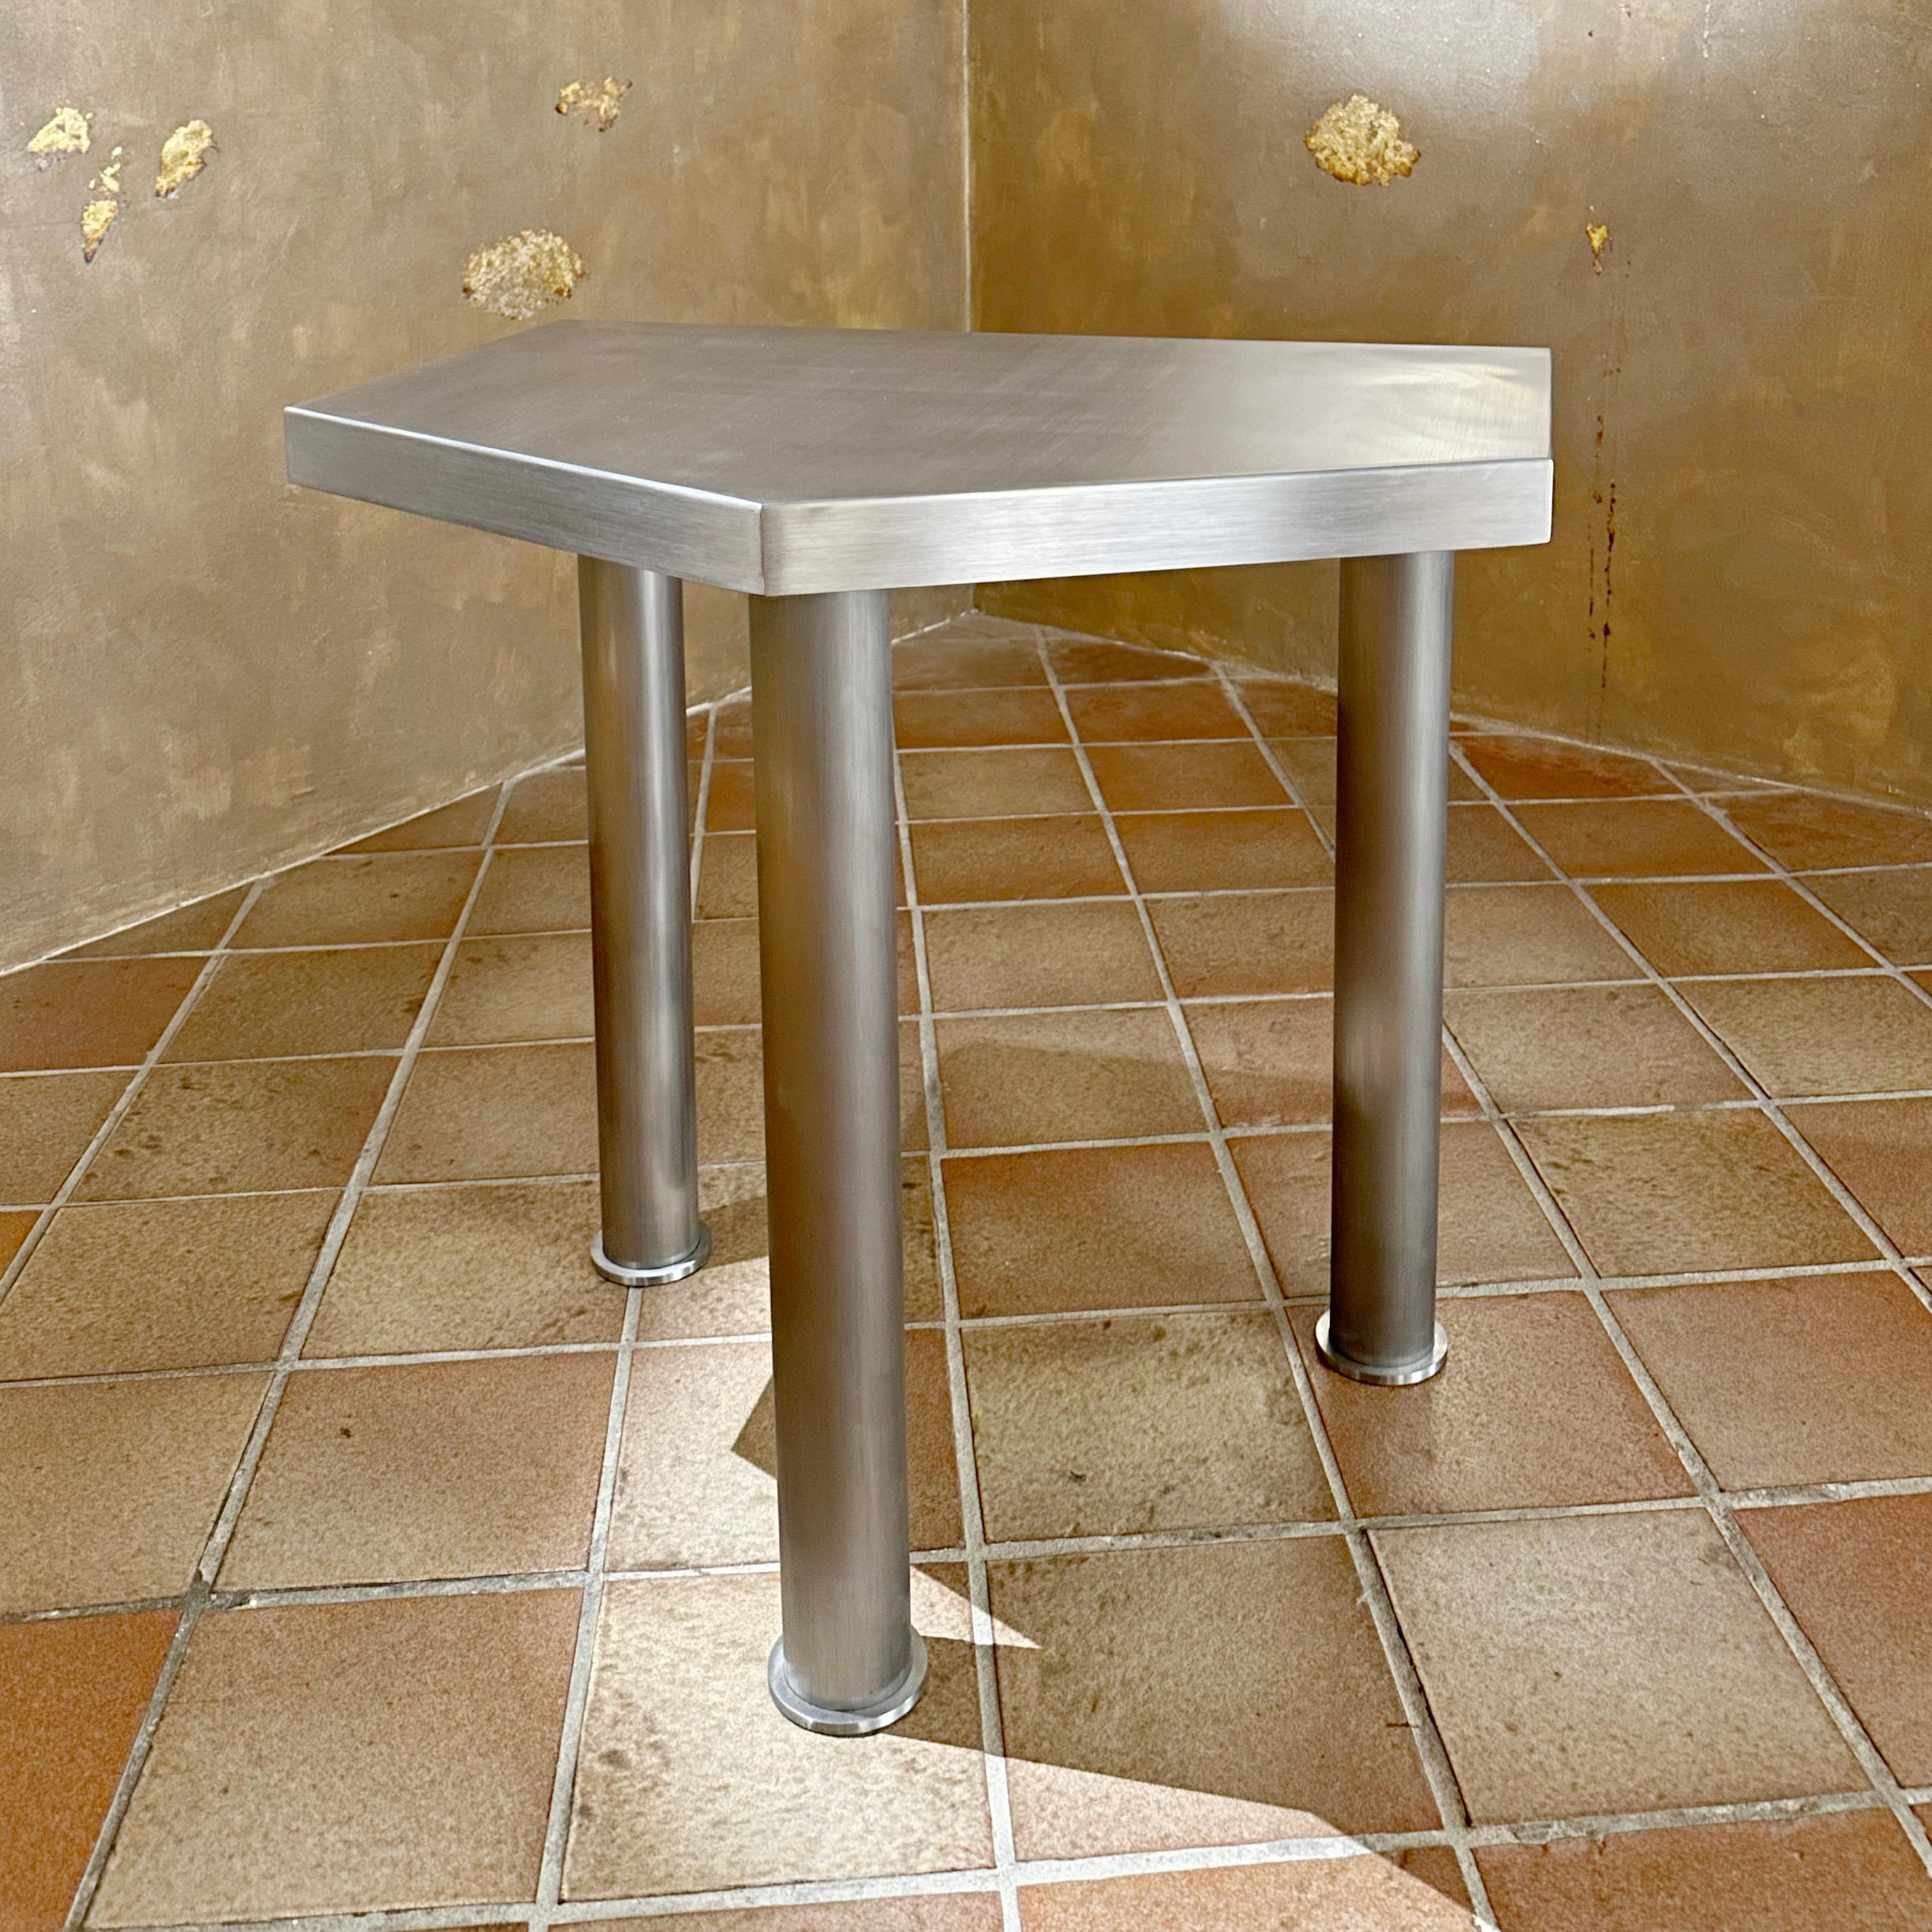 “Running Gun” Accent Table, Iron, JAMES VINCENT MILANO, Italy, 2023

Pentagonal accent table with removable tripod legs. 
For use individually or as extensions to complete “Running Gun” Dining Table.
Polished and brushed iron.
Handcrafted in Cantù,